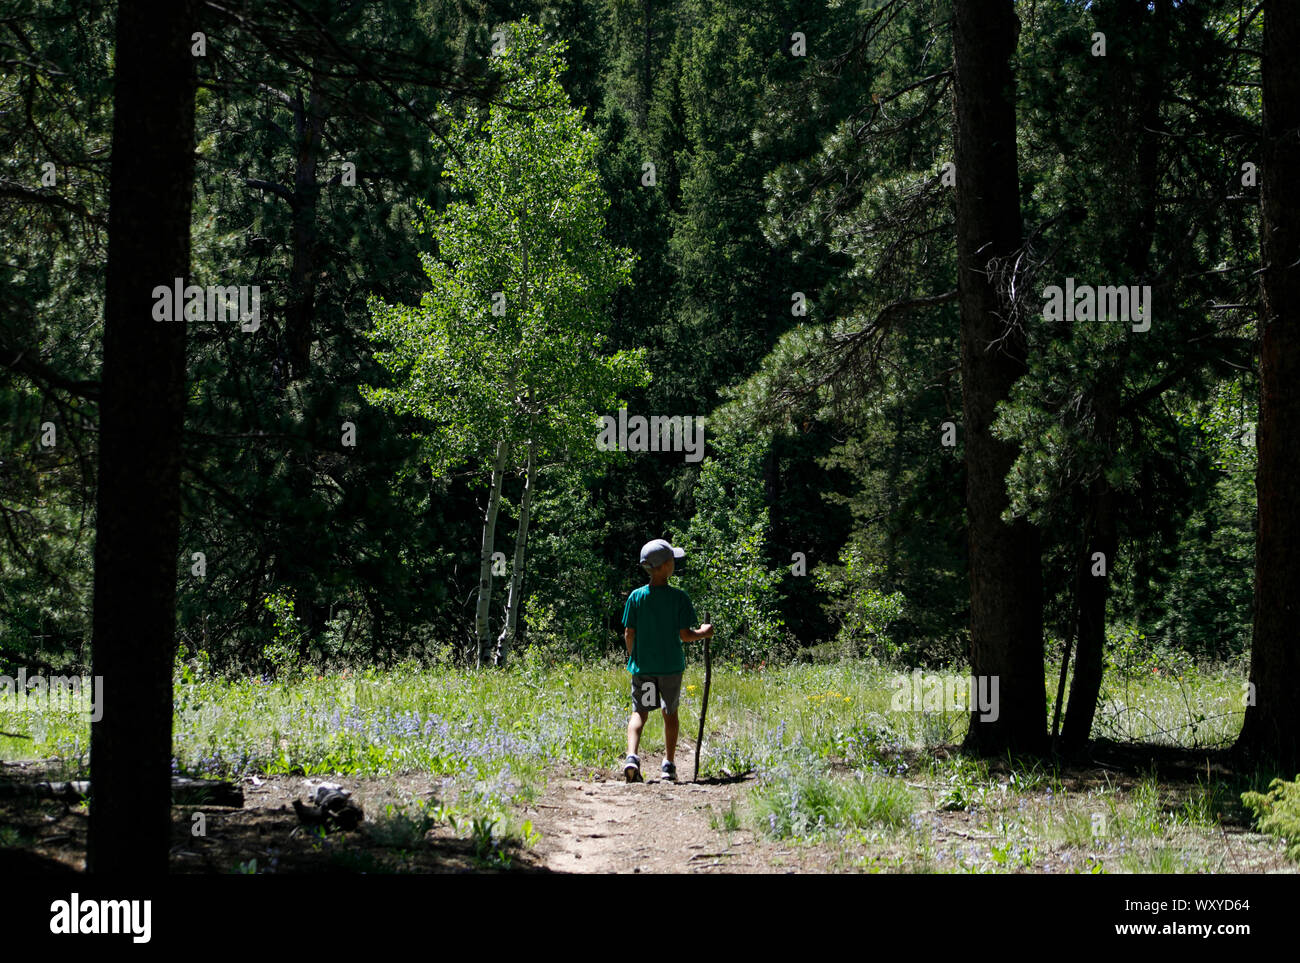 A young boy hikes with a walking stick on a National Forest trail in the Rocky Mountains during summer in Colorado. Stock Photo